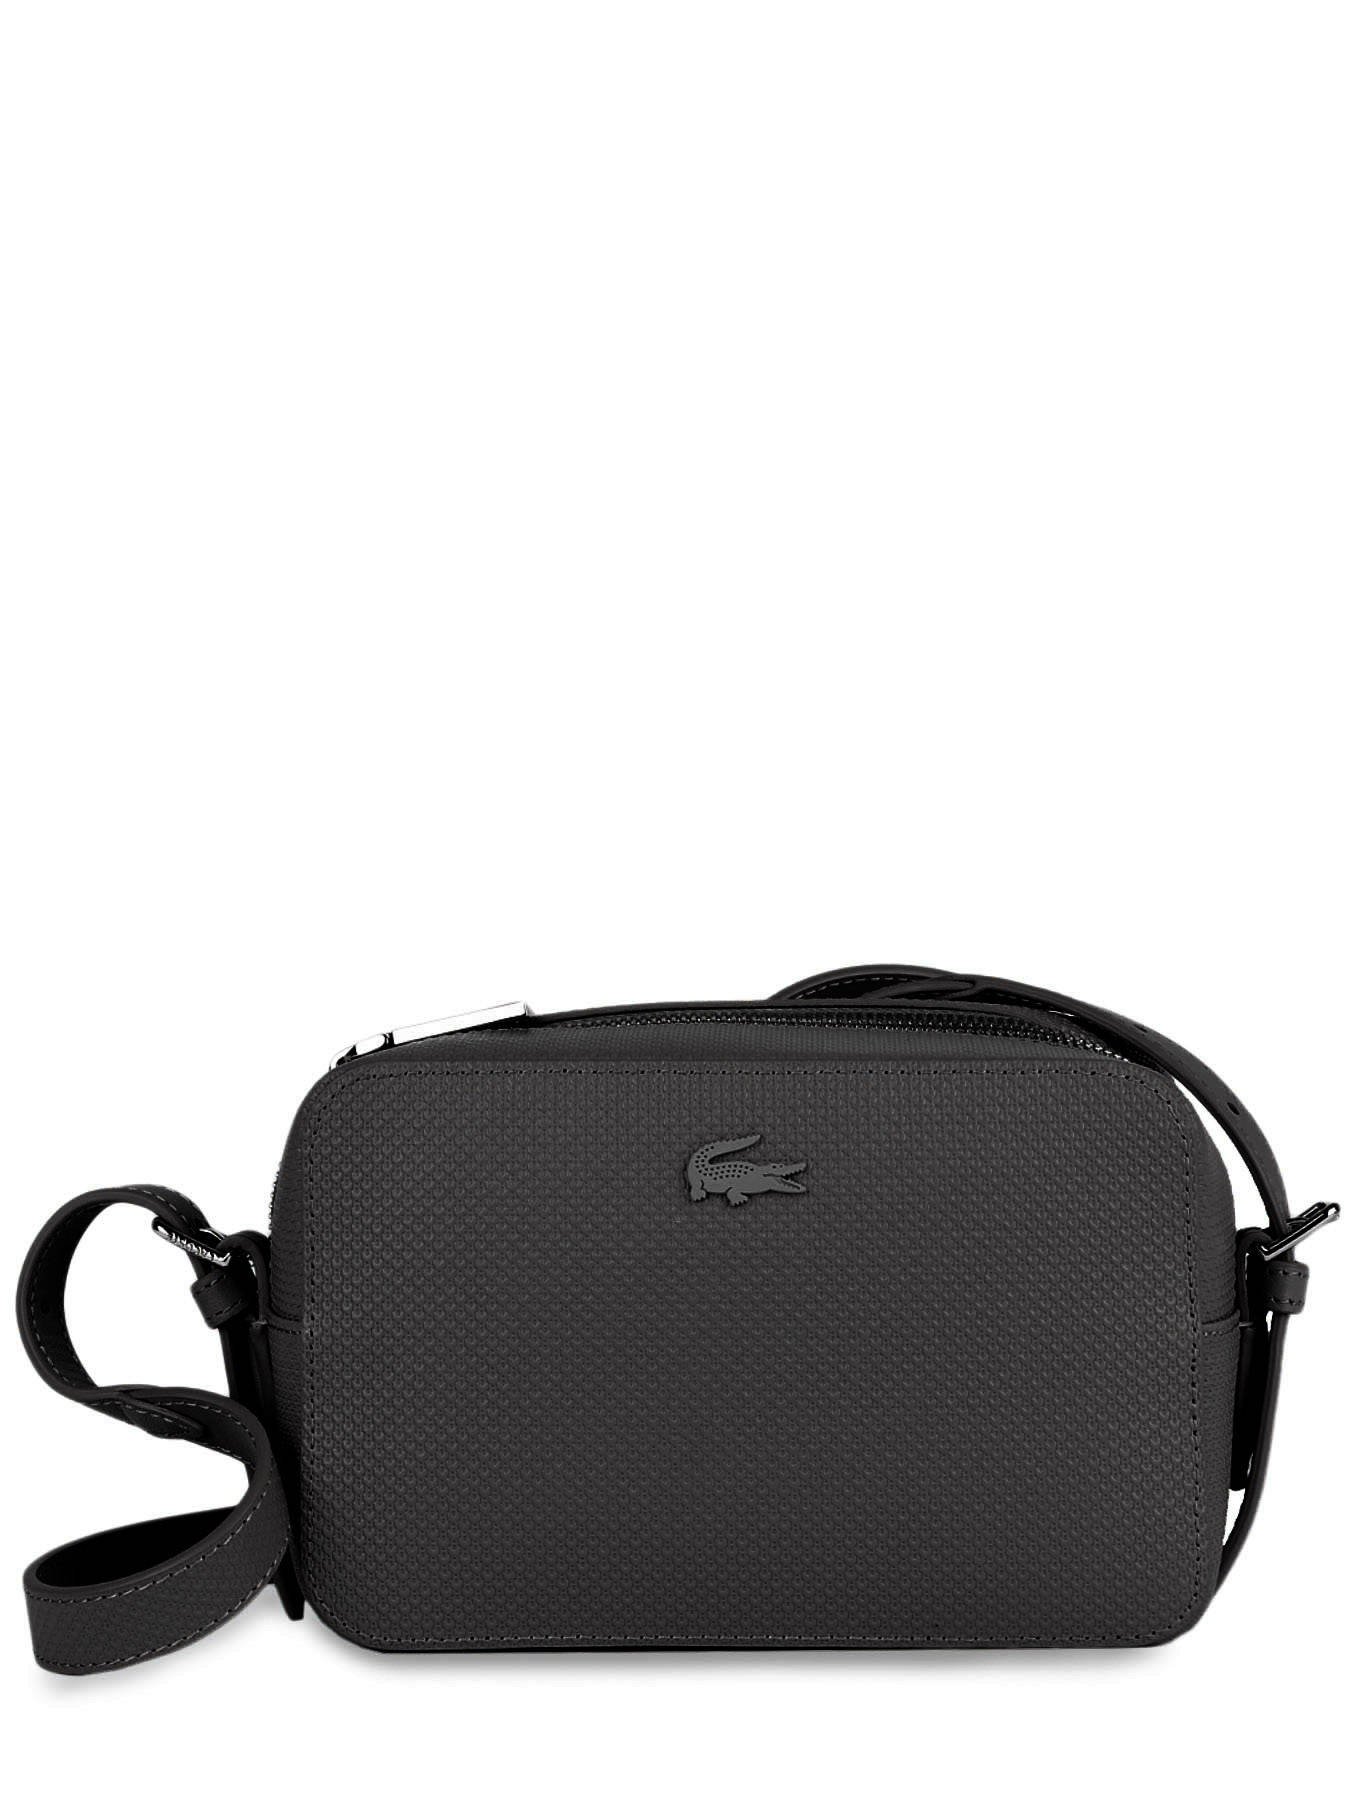 Lacoste Crossbody bag NF3879KL - best prices